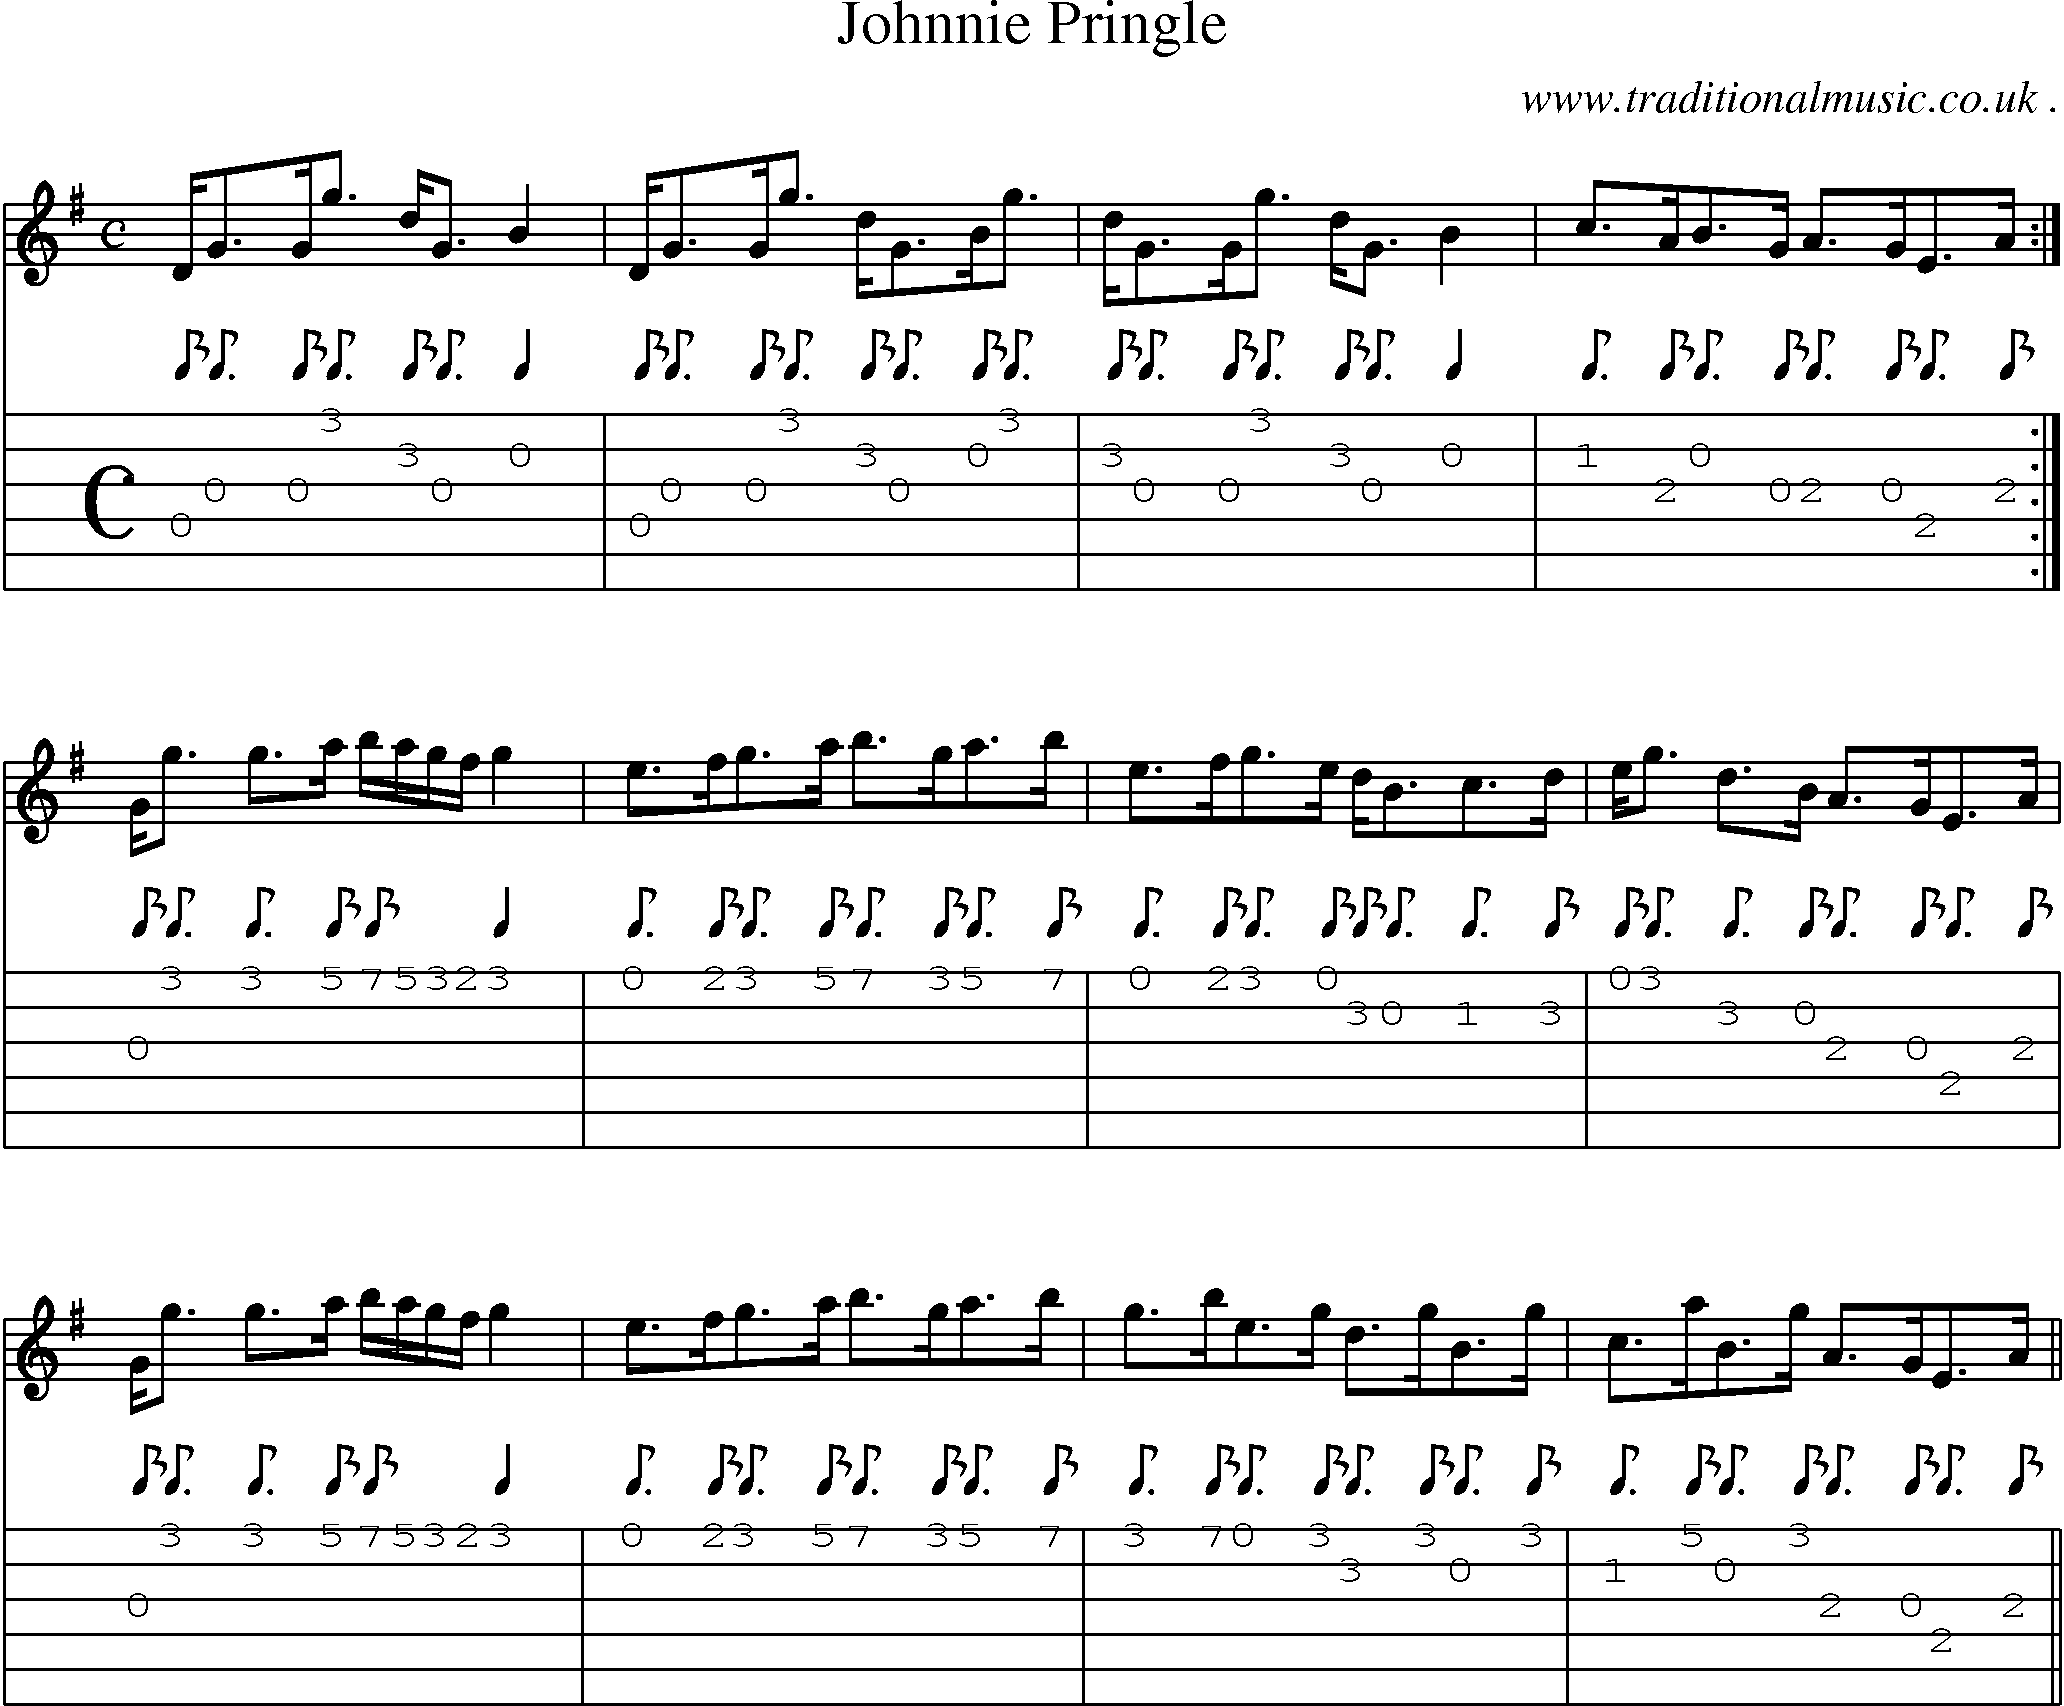 Sheet-music  score, Chords and Guitar Tabs for Johnnie Pringle